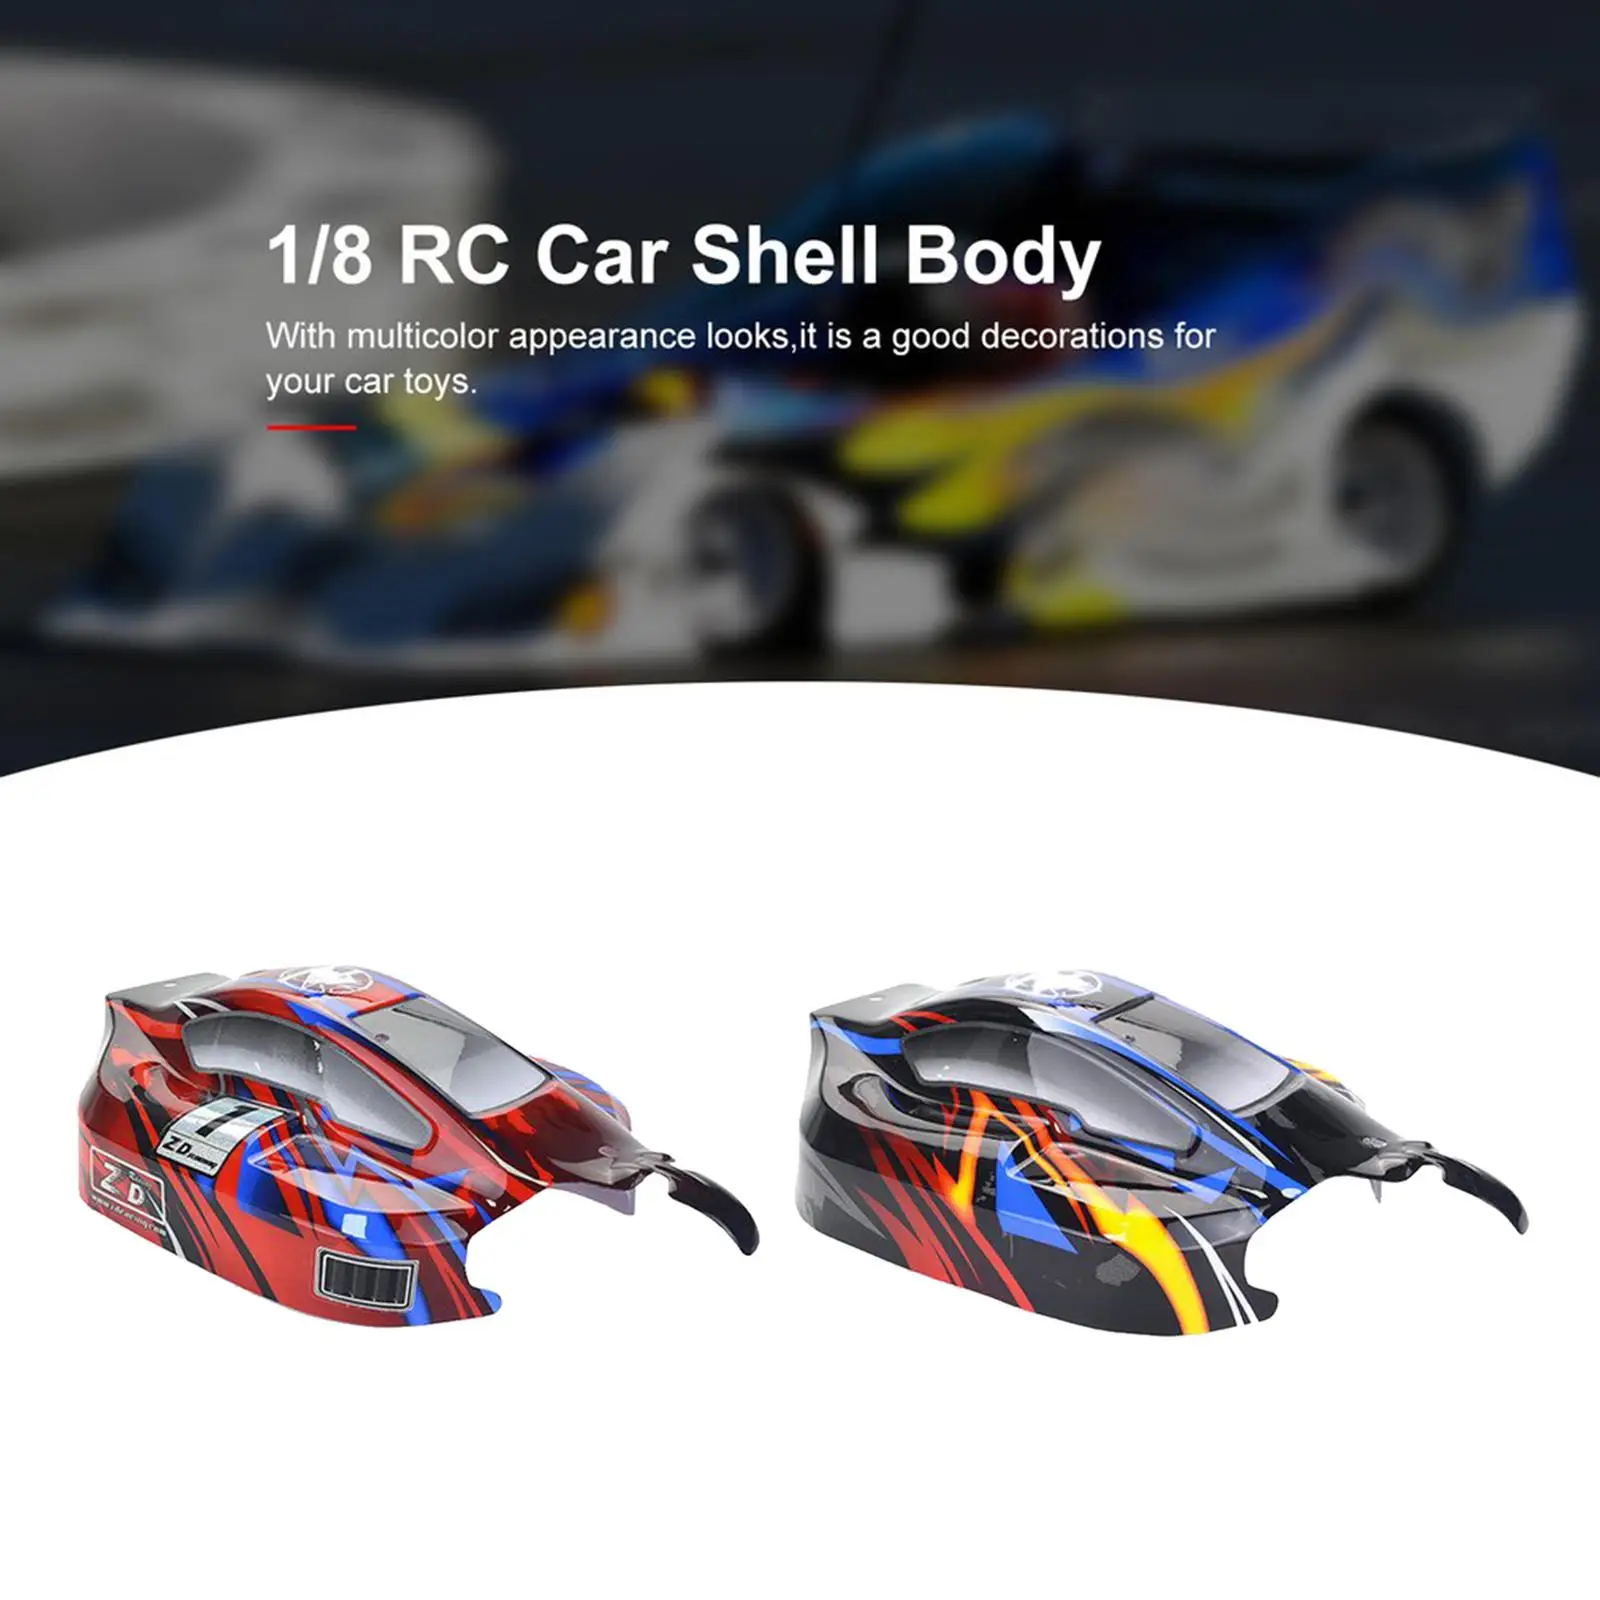 RC Truck Body Shell 1/8 for Exceed Scale 4wd  Trucks RC Car with Stickers